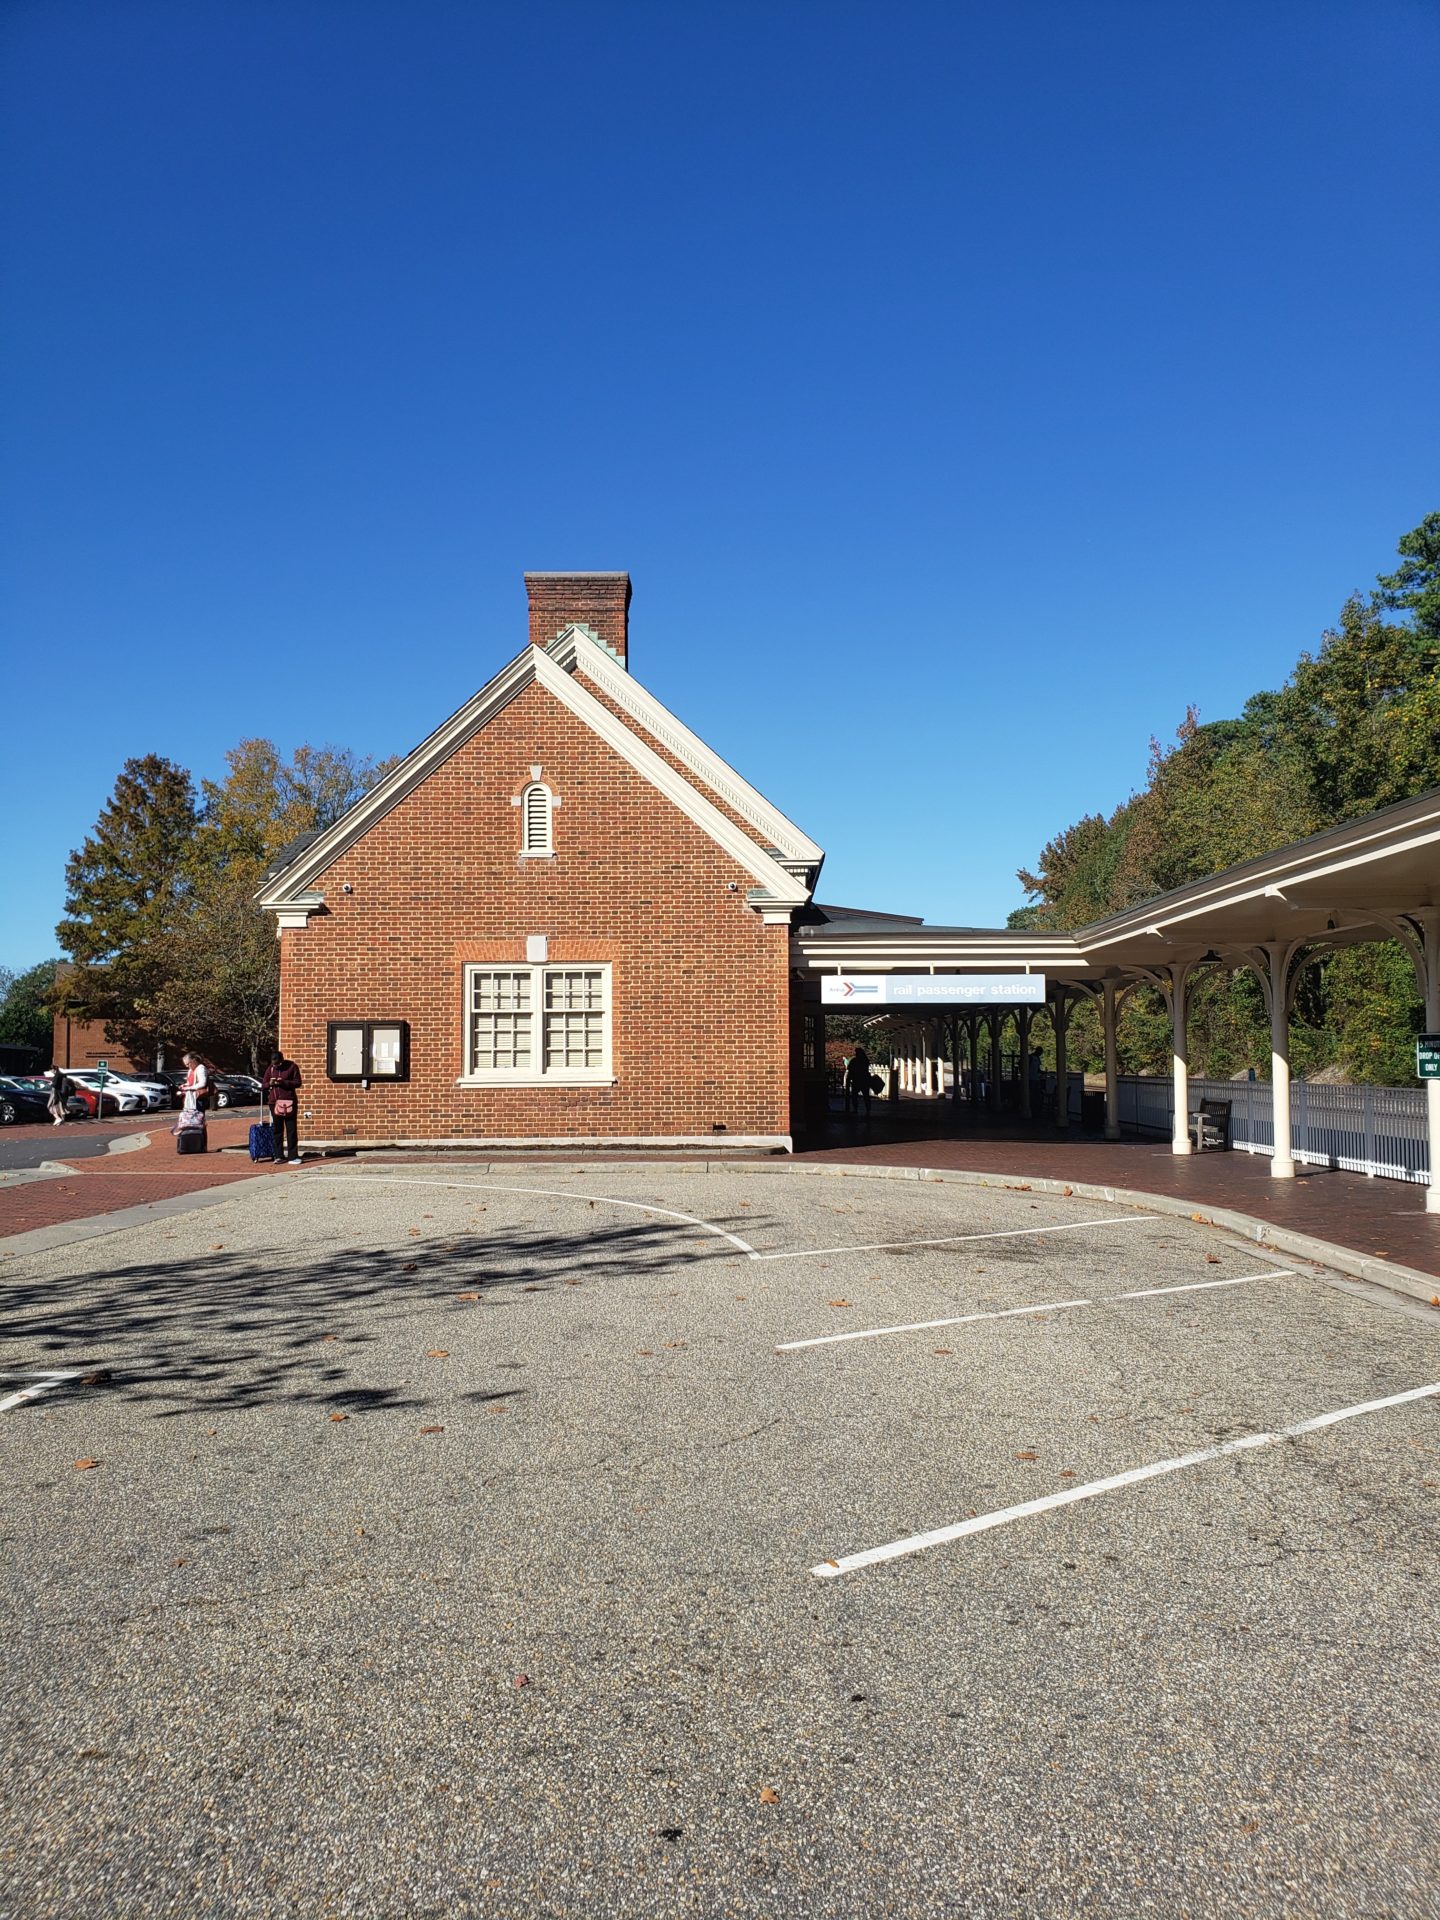 a brick building with a covered parking lot